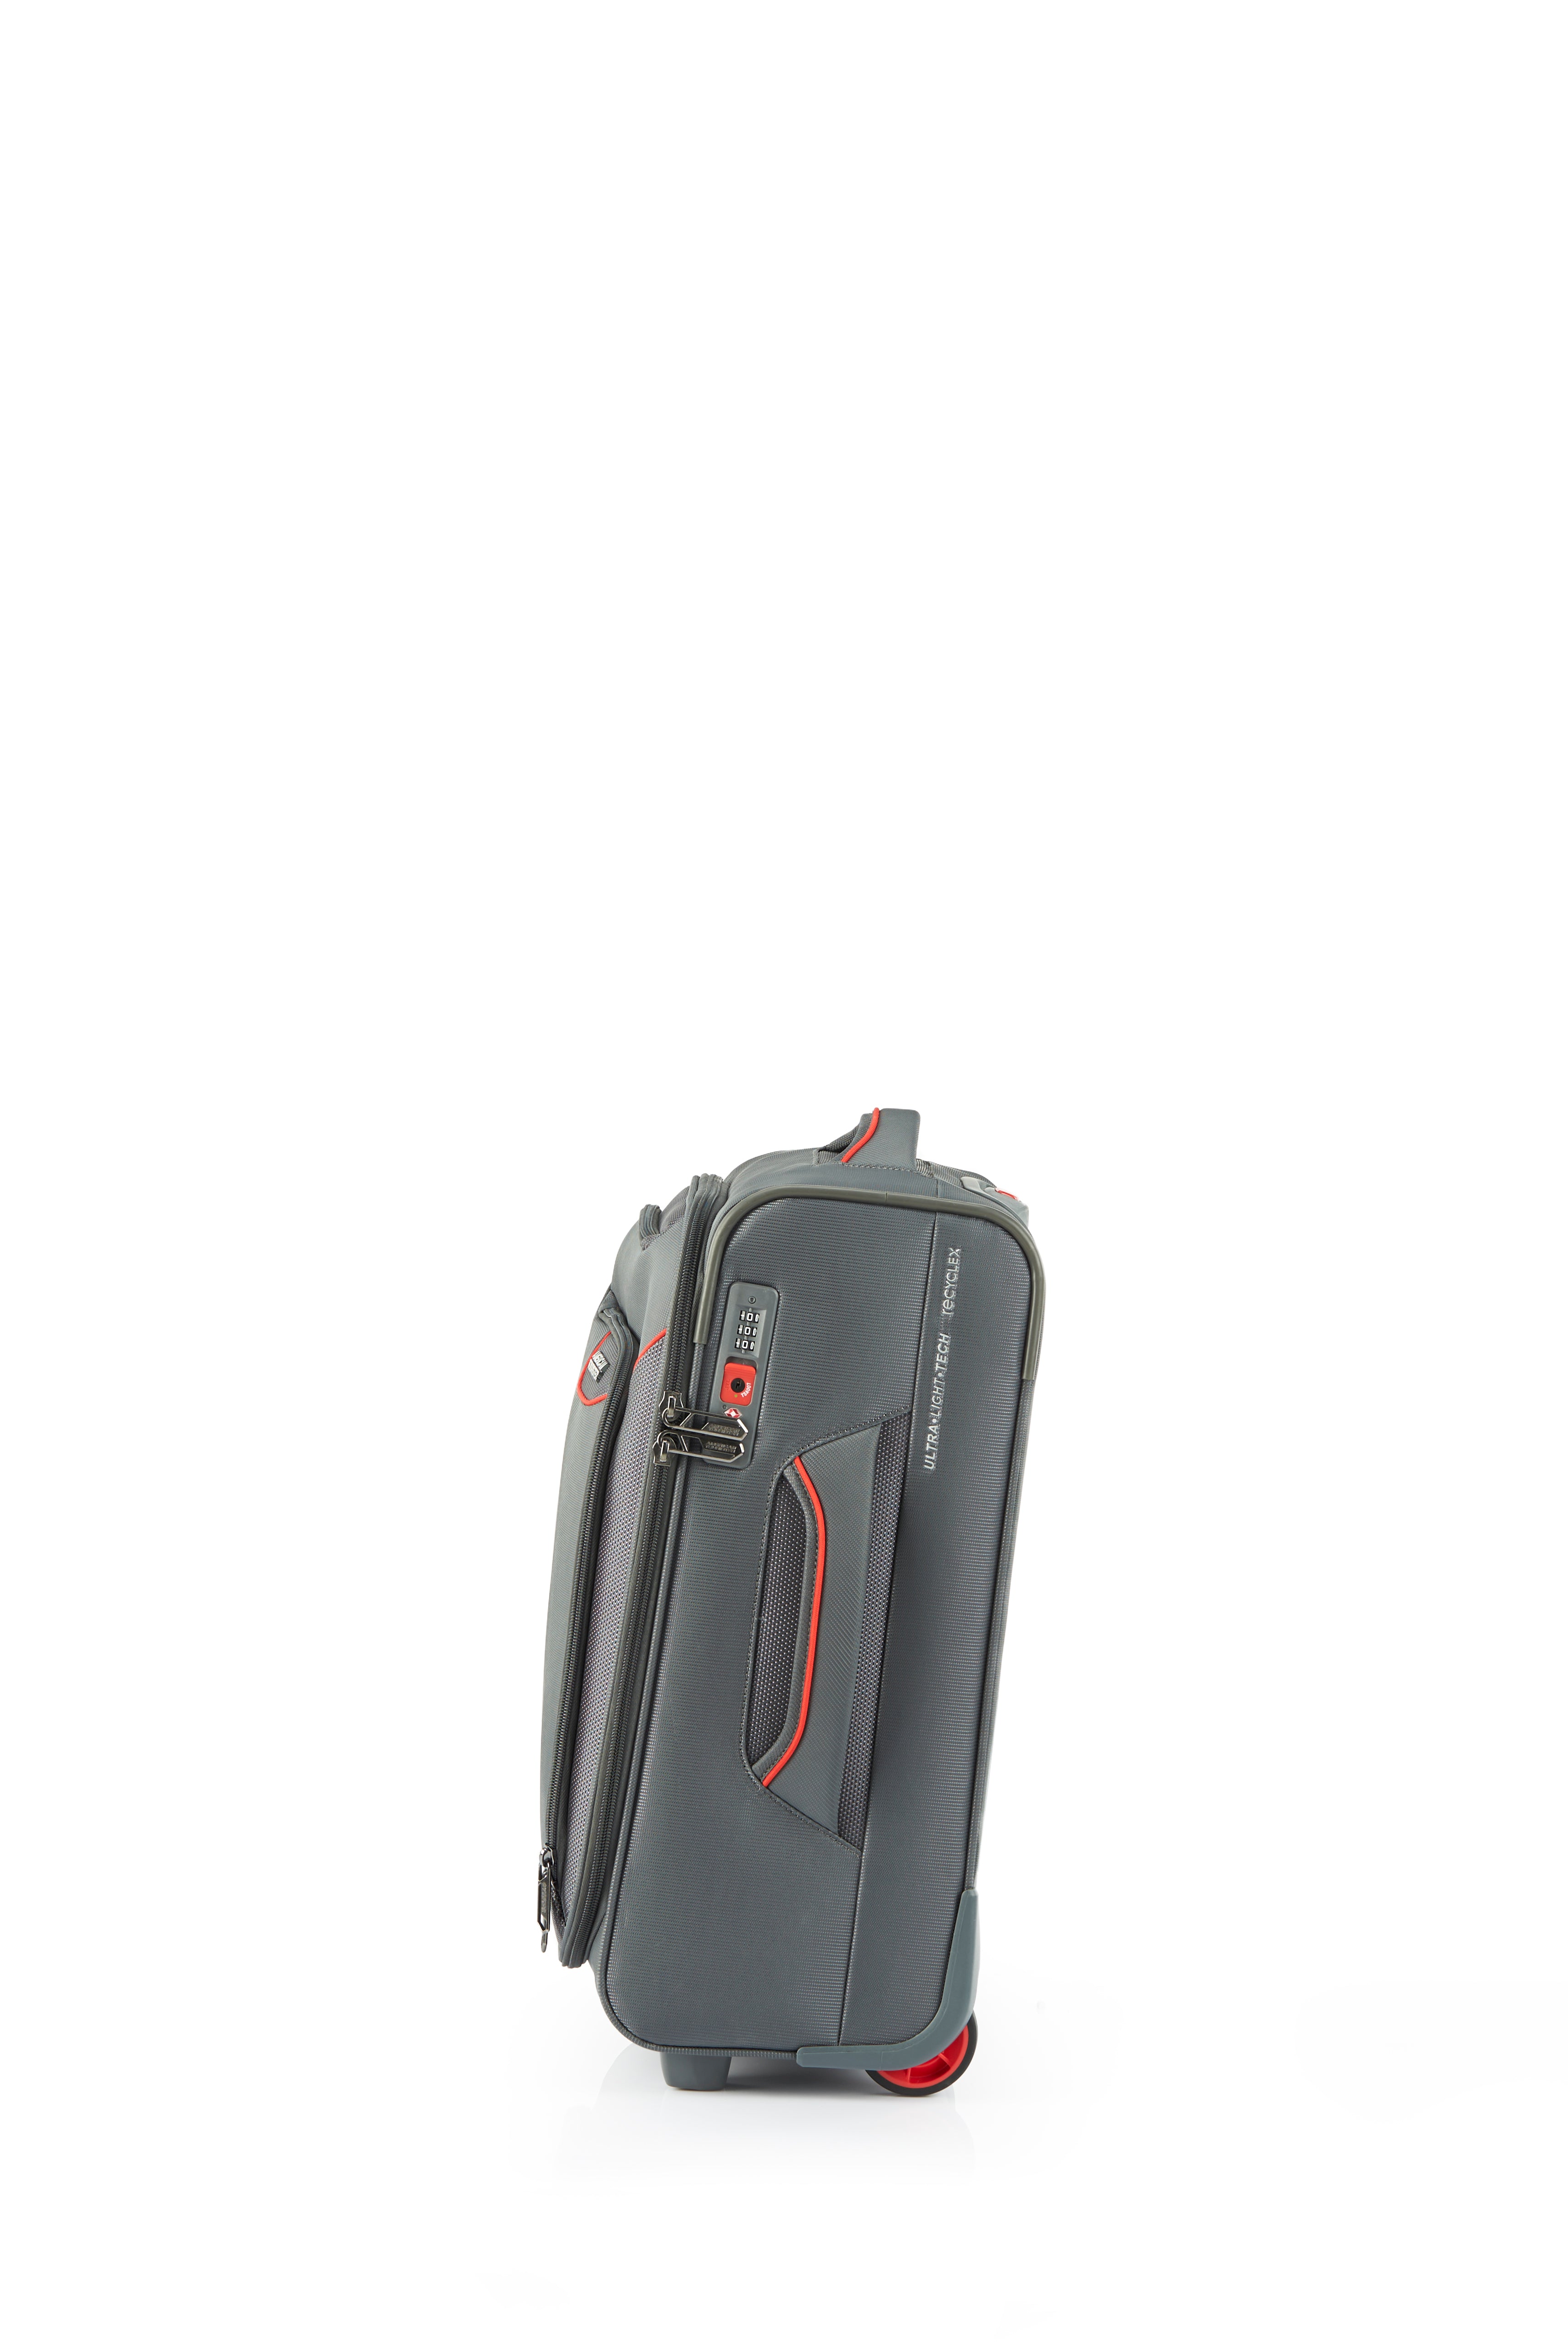 American Tourister - Applite ECO 50cm Small Suitcase - Grey/Red-4